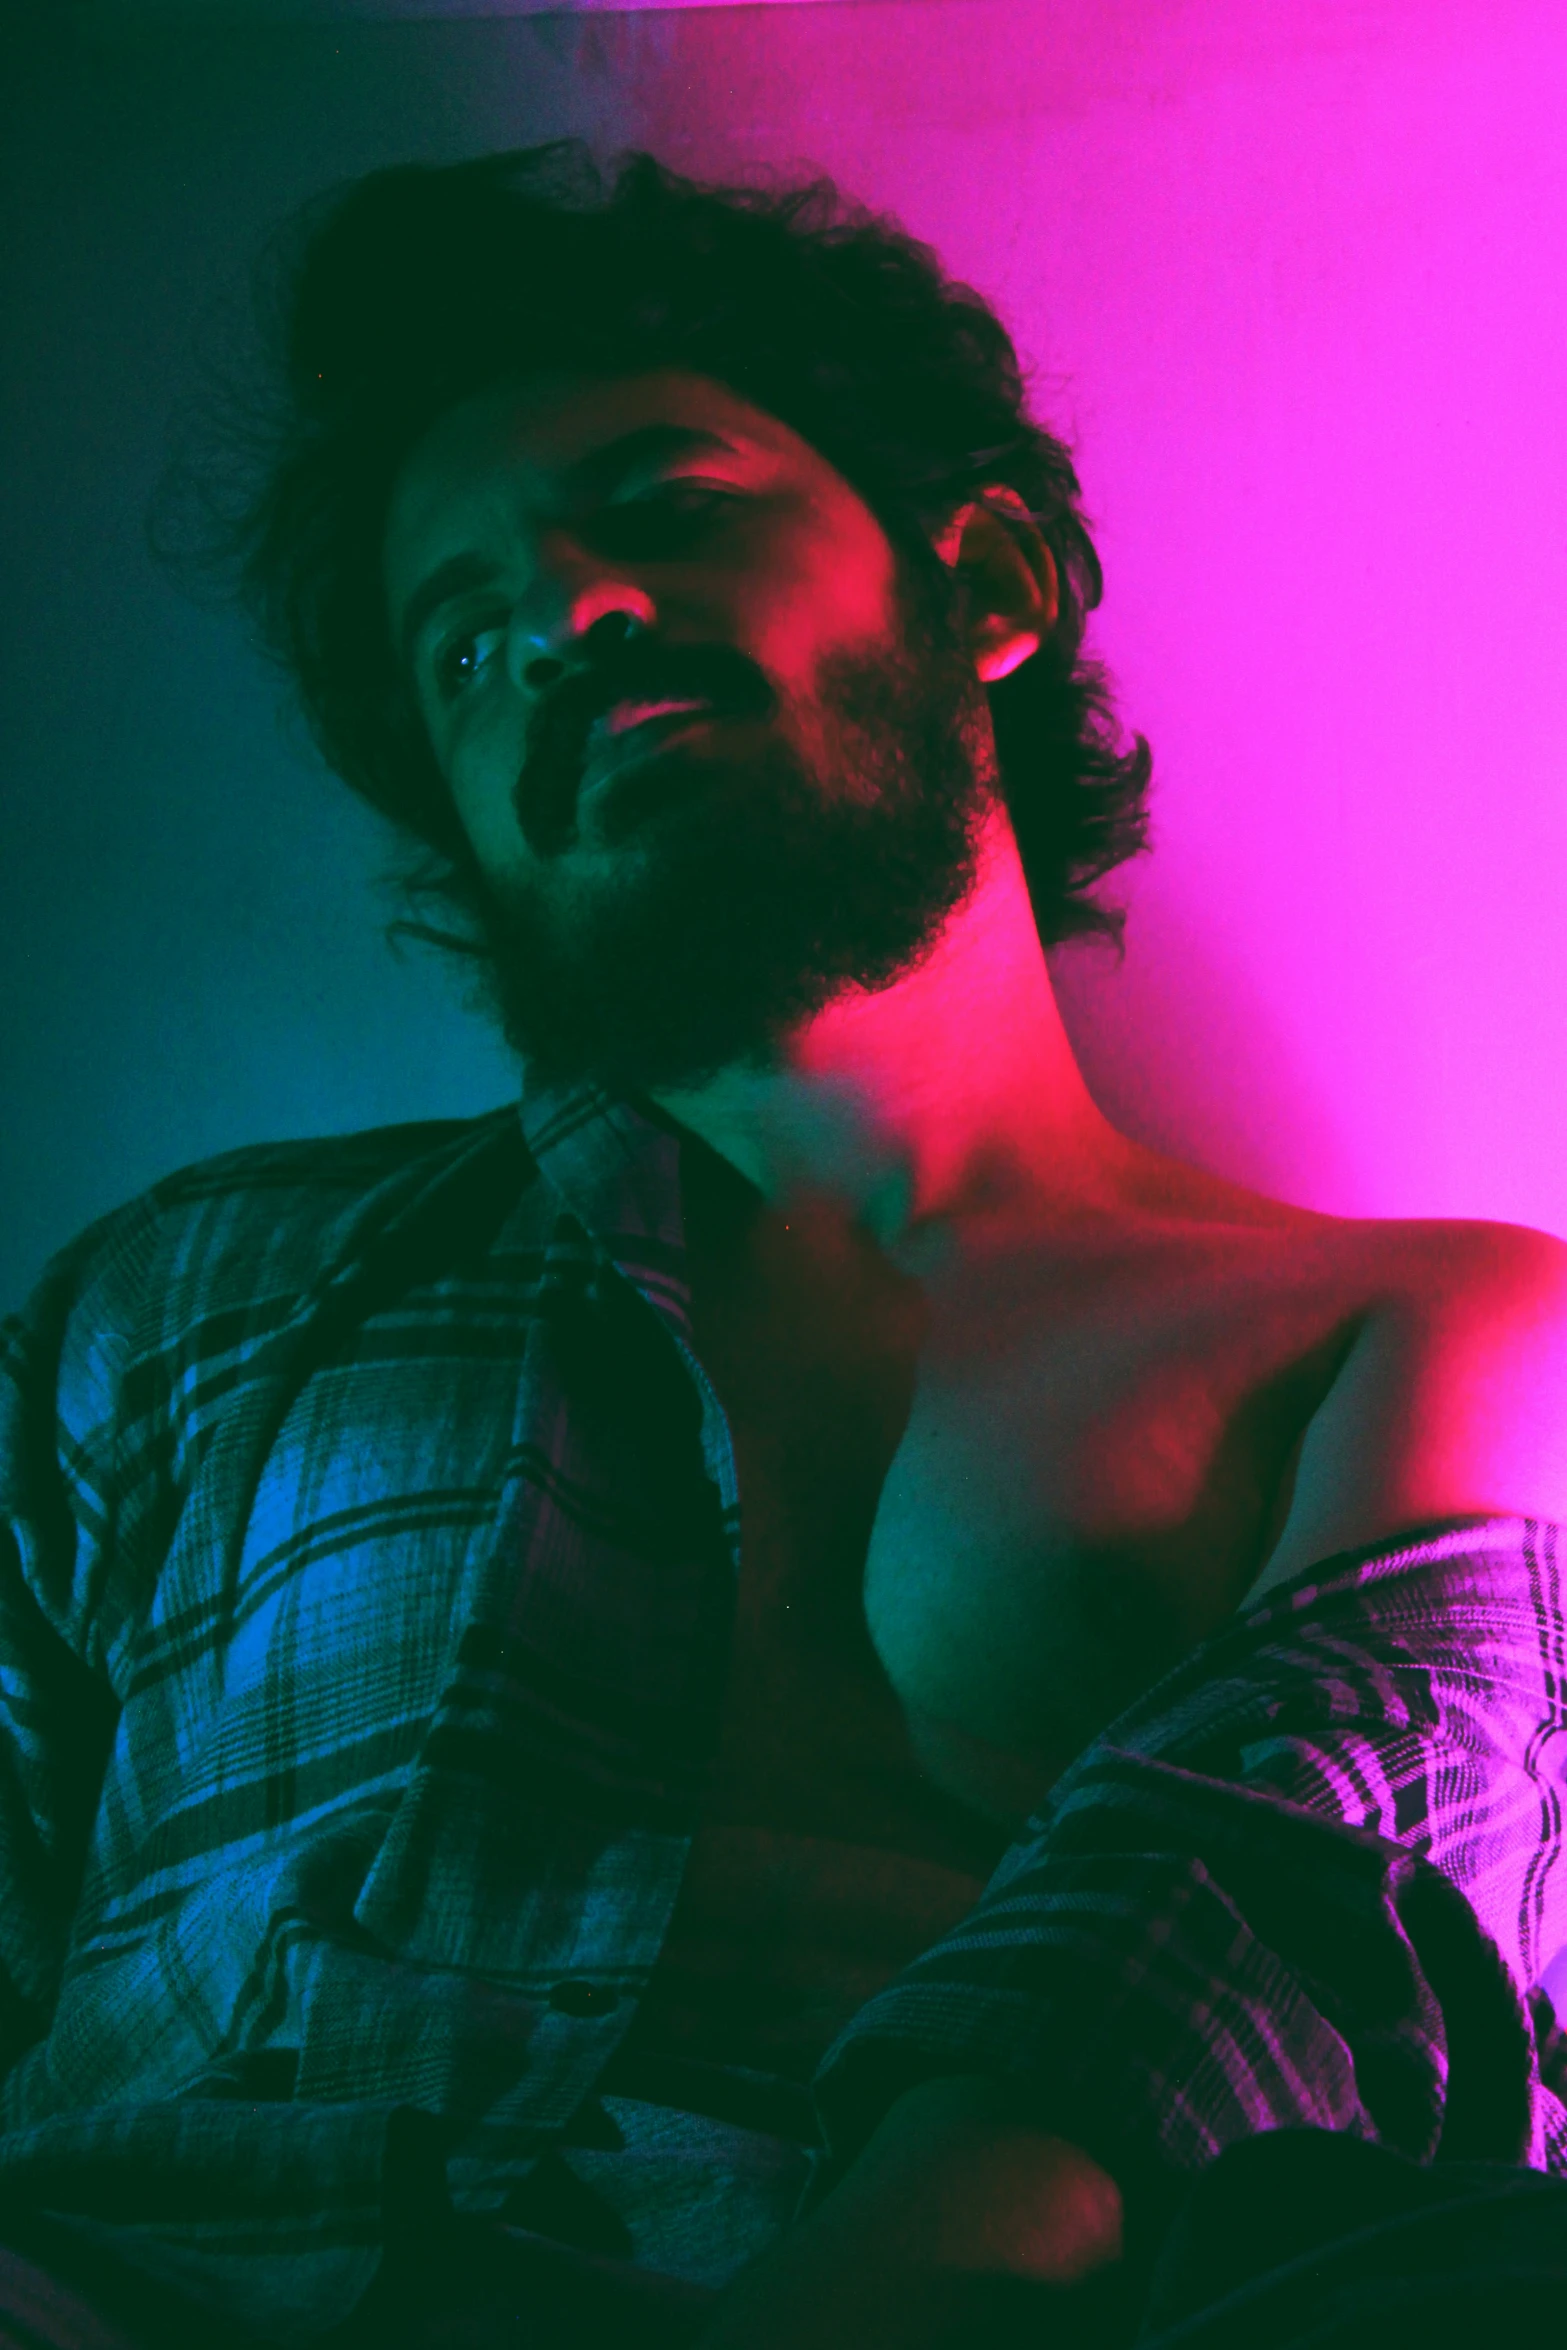 a shirtless man is sitting against a pink light